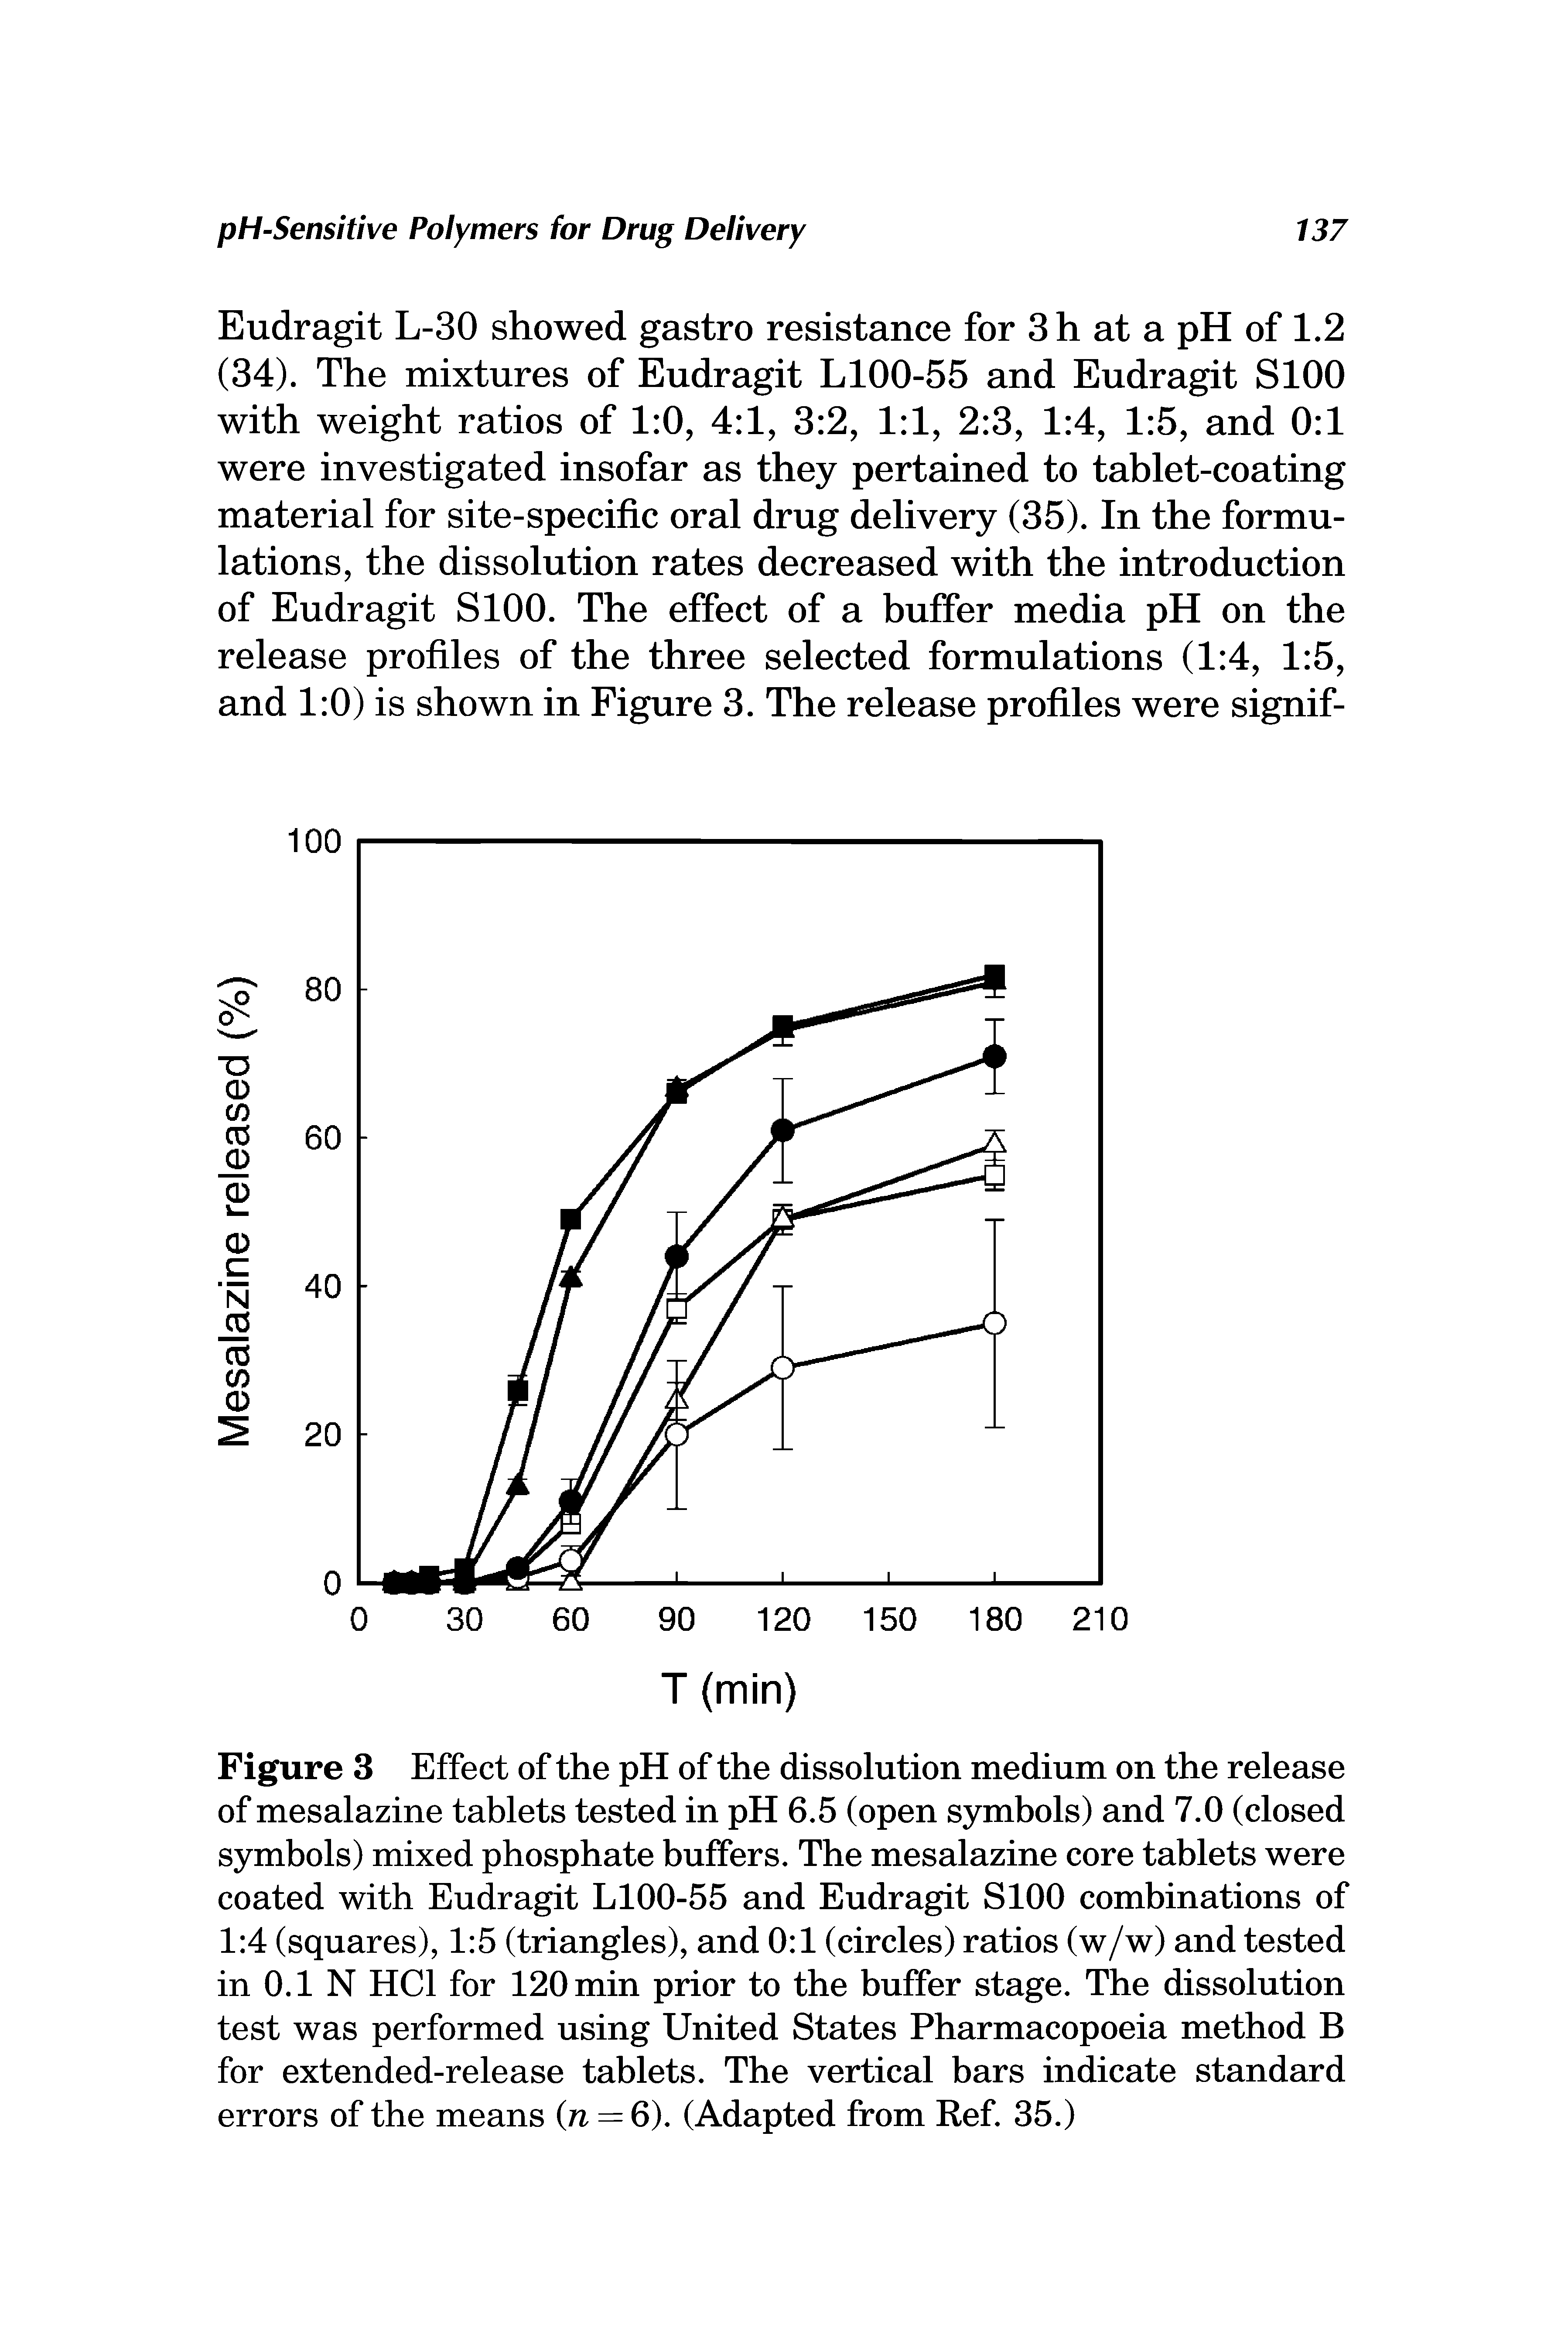 Figure 3 Effect of the pH of the dissolution medium on the release of mesalazine tablets tested in pH 6.5 (open symbols) and 7.0 (closed symbols) mixed phosphate buffers. The mesalazine core tablets were coated with Eudragit LlOO-55 and Eudragit SlOO combinations of 1 4 (squares), 1 5 (triangles), and 0 1 (circles) ratios (w/w) and tested in 0.1 N HCl for 120 min prior to the buffer stage. The dissolution test was performed using United States Pharmacopoeia method B for extended-release tablets. The vertical bars indicate standard errors of the means (n = 6). (Adapted from Ref. 35.)...